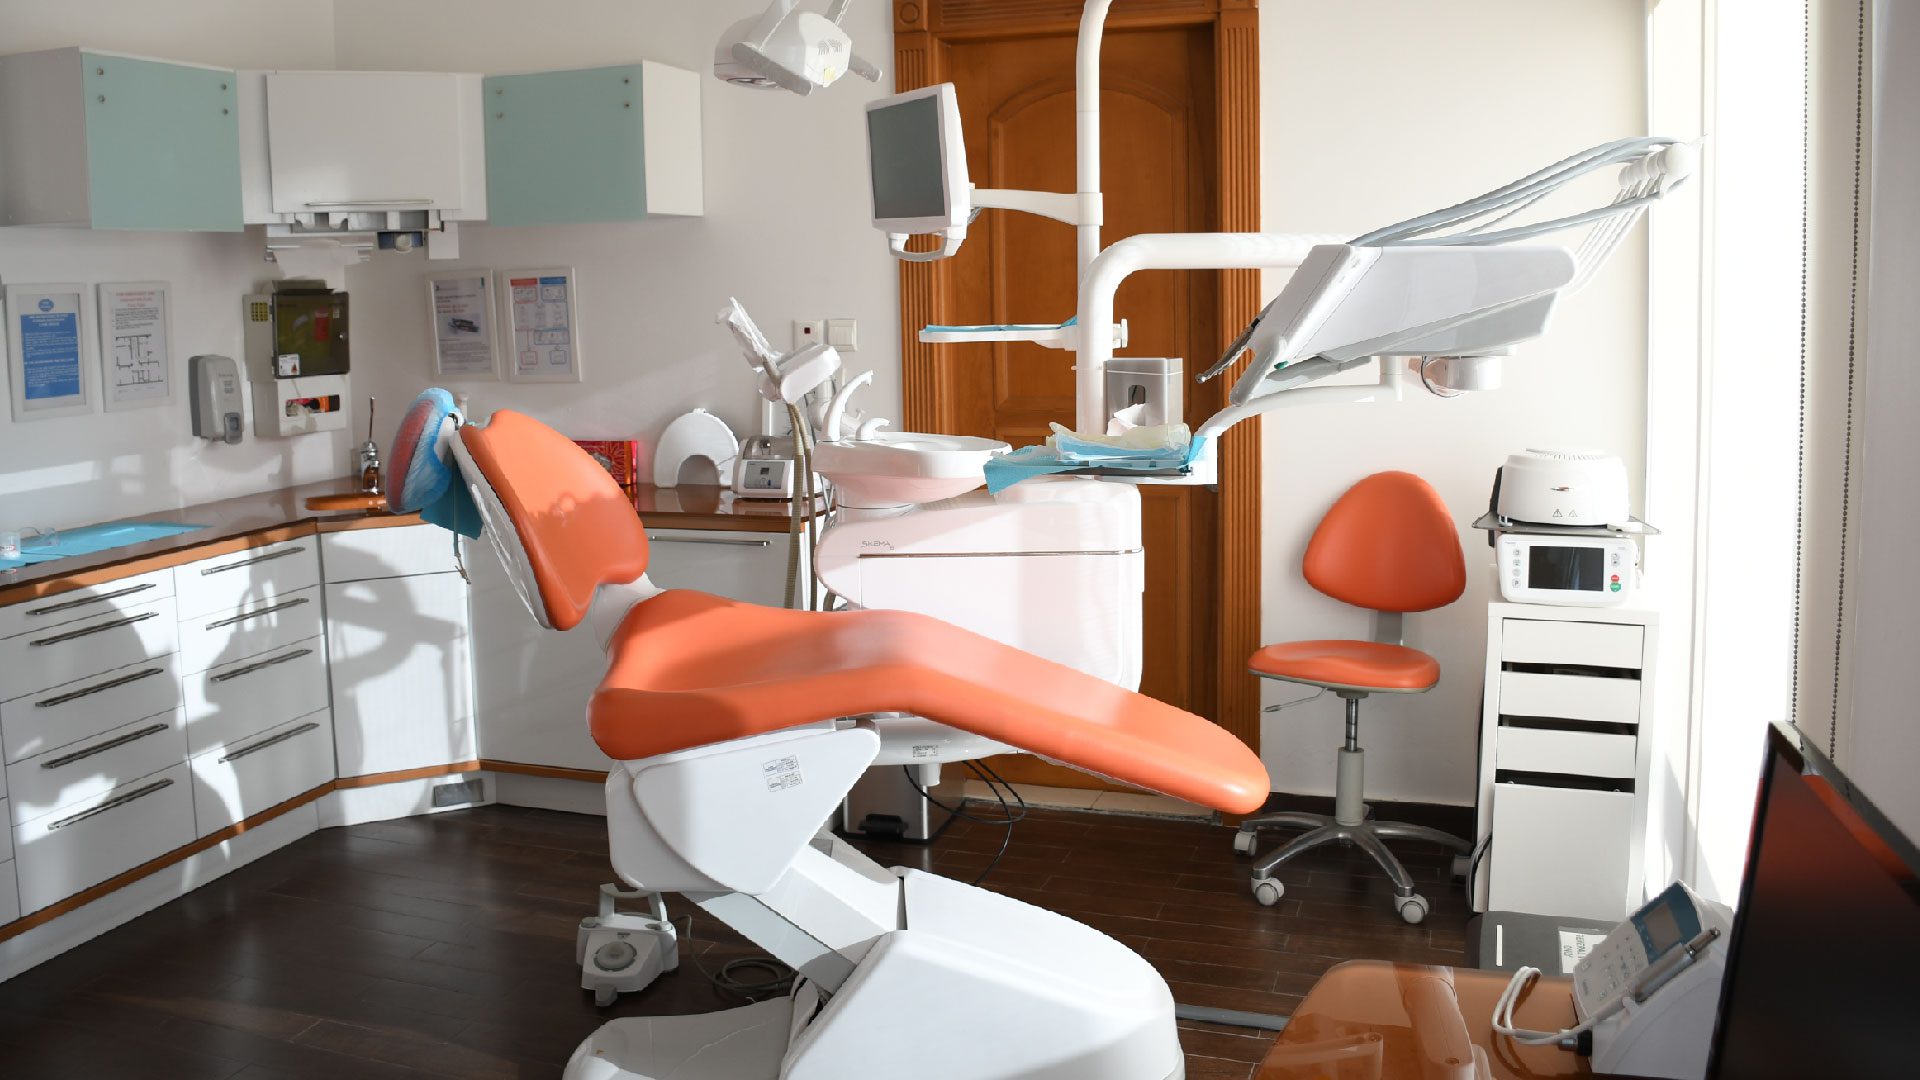 Dental Partners - Services and Support | Dental DSO Partnership